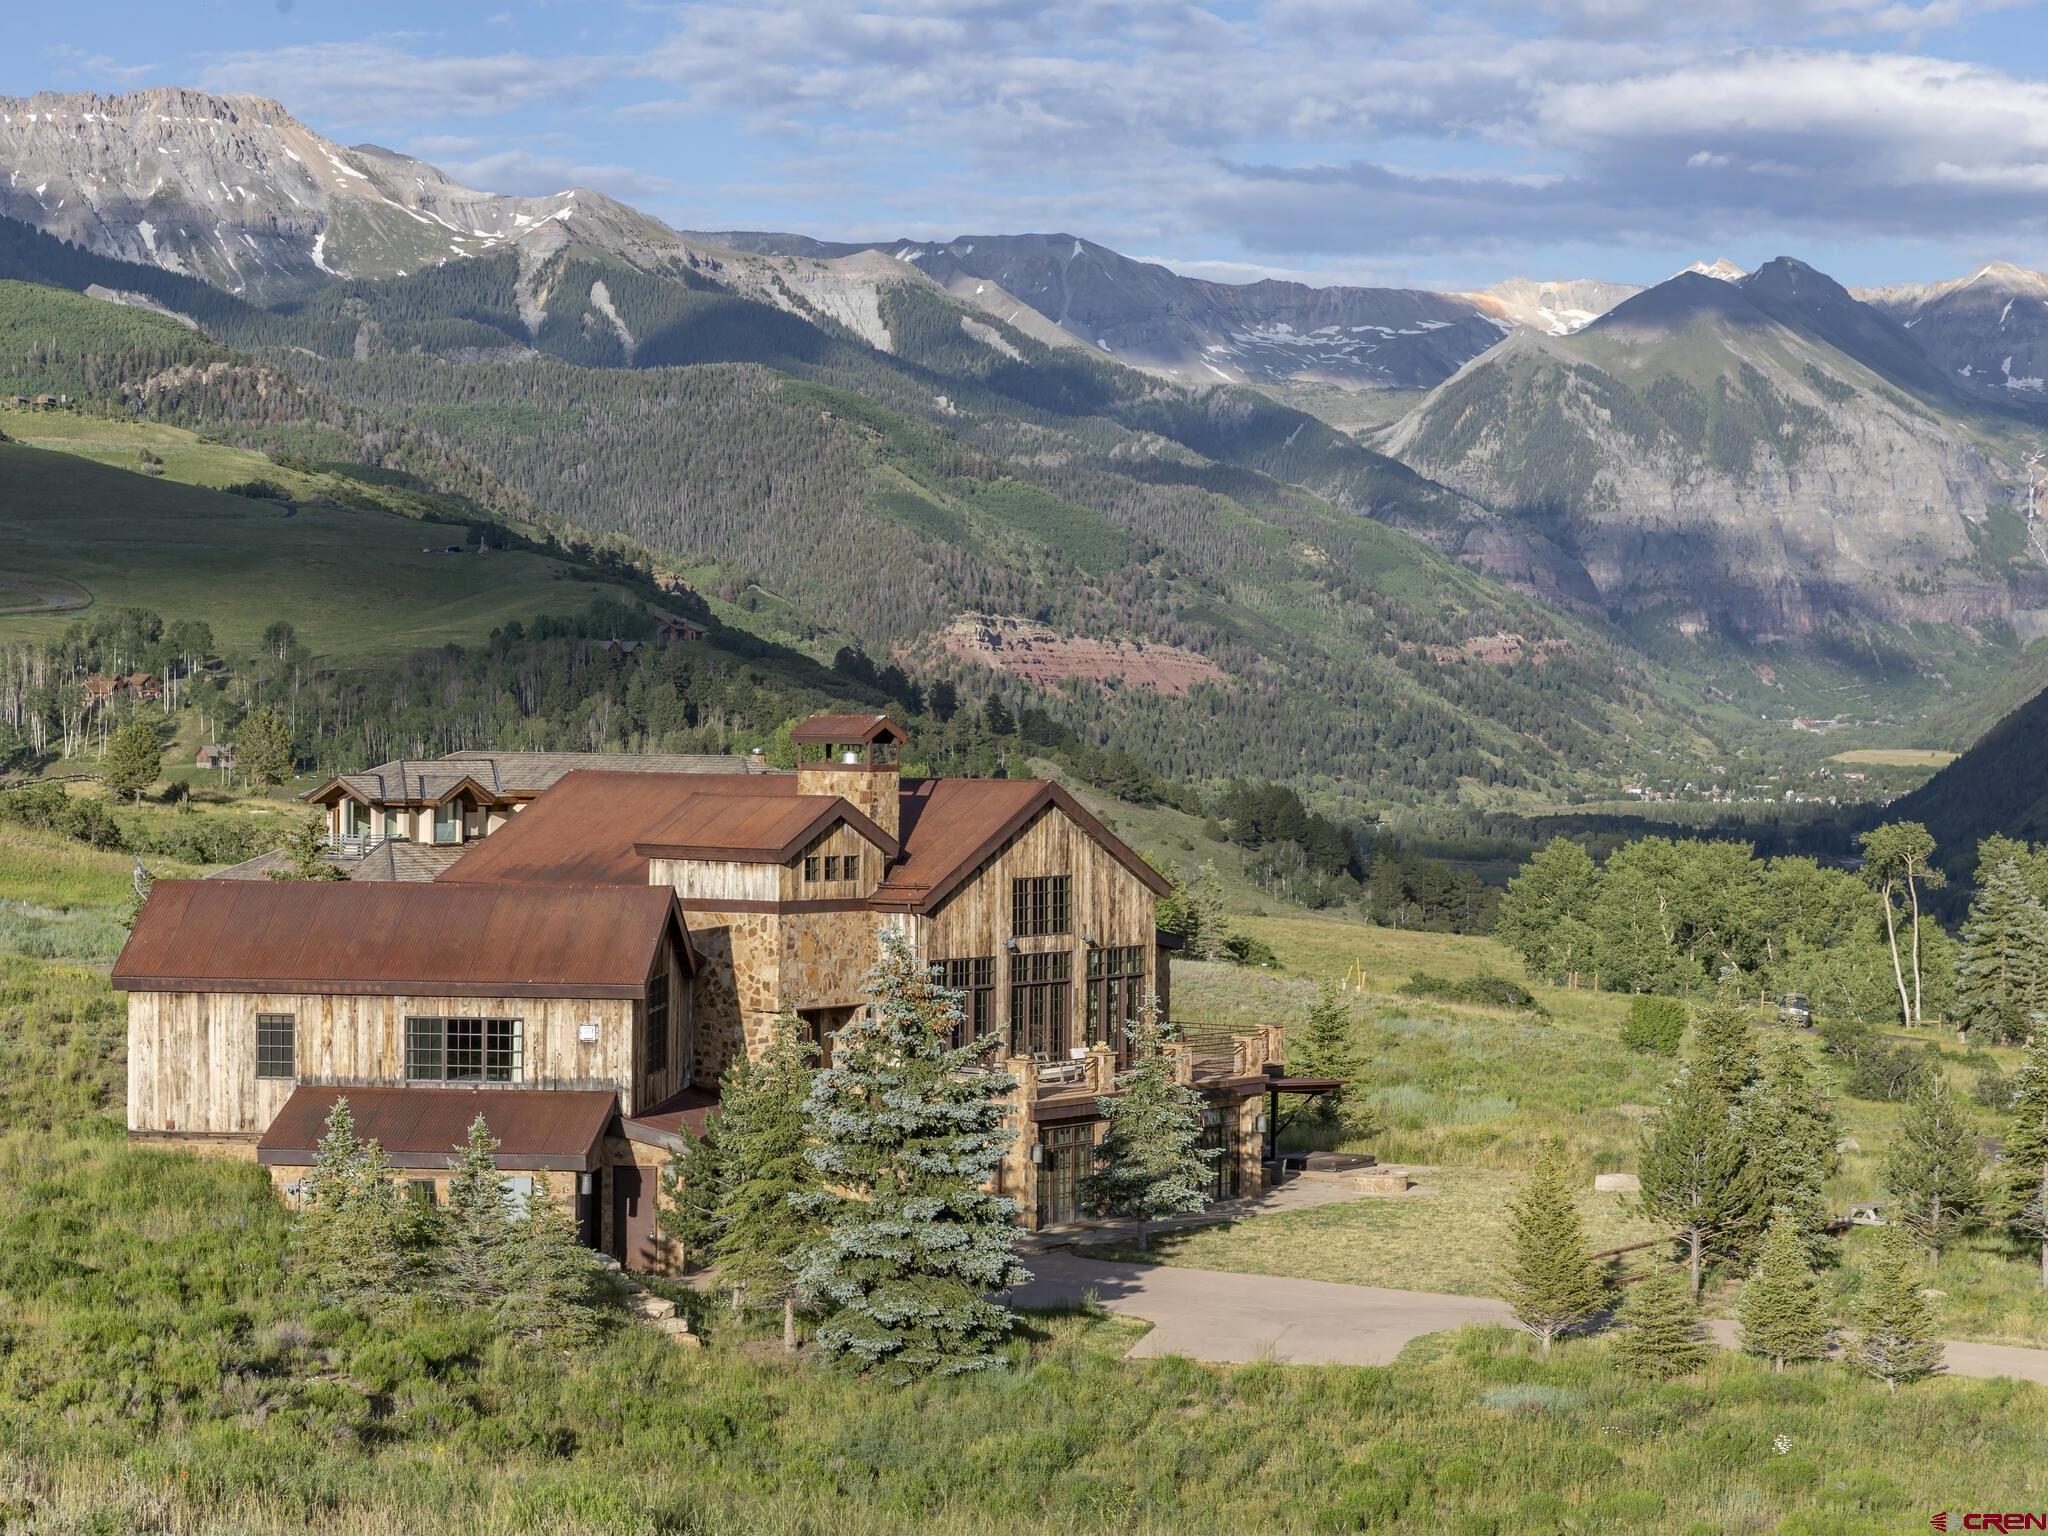 Timeless and tasteful, this rebuilt, pre-civil war home offers the combination of quality design, sun-splashed days and 180-degree views, including the famed Wilson Mountain range that defines the Telluride Region. Old meets new, with hand hewn posts and beams boasting a finish level deserving of a luxury Mountain Retreat. Less than five miles from all the action and convenience of downtown Telluride and the world class Telluride Ski Resort, Meadows at Deep Creek subdivision is private and peaceful neighborhood with just eight lots on a dead-end road. Built in 2009 with a full remodel of the lower level in 2017, this residence features four bedrooms with four ensuite baths, two half baths and a highly versatile loft.